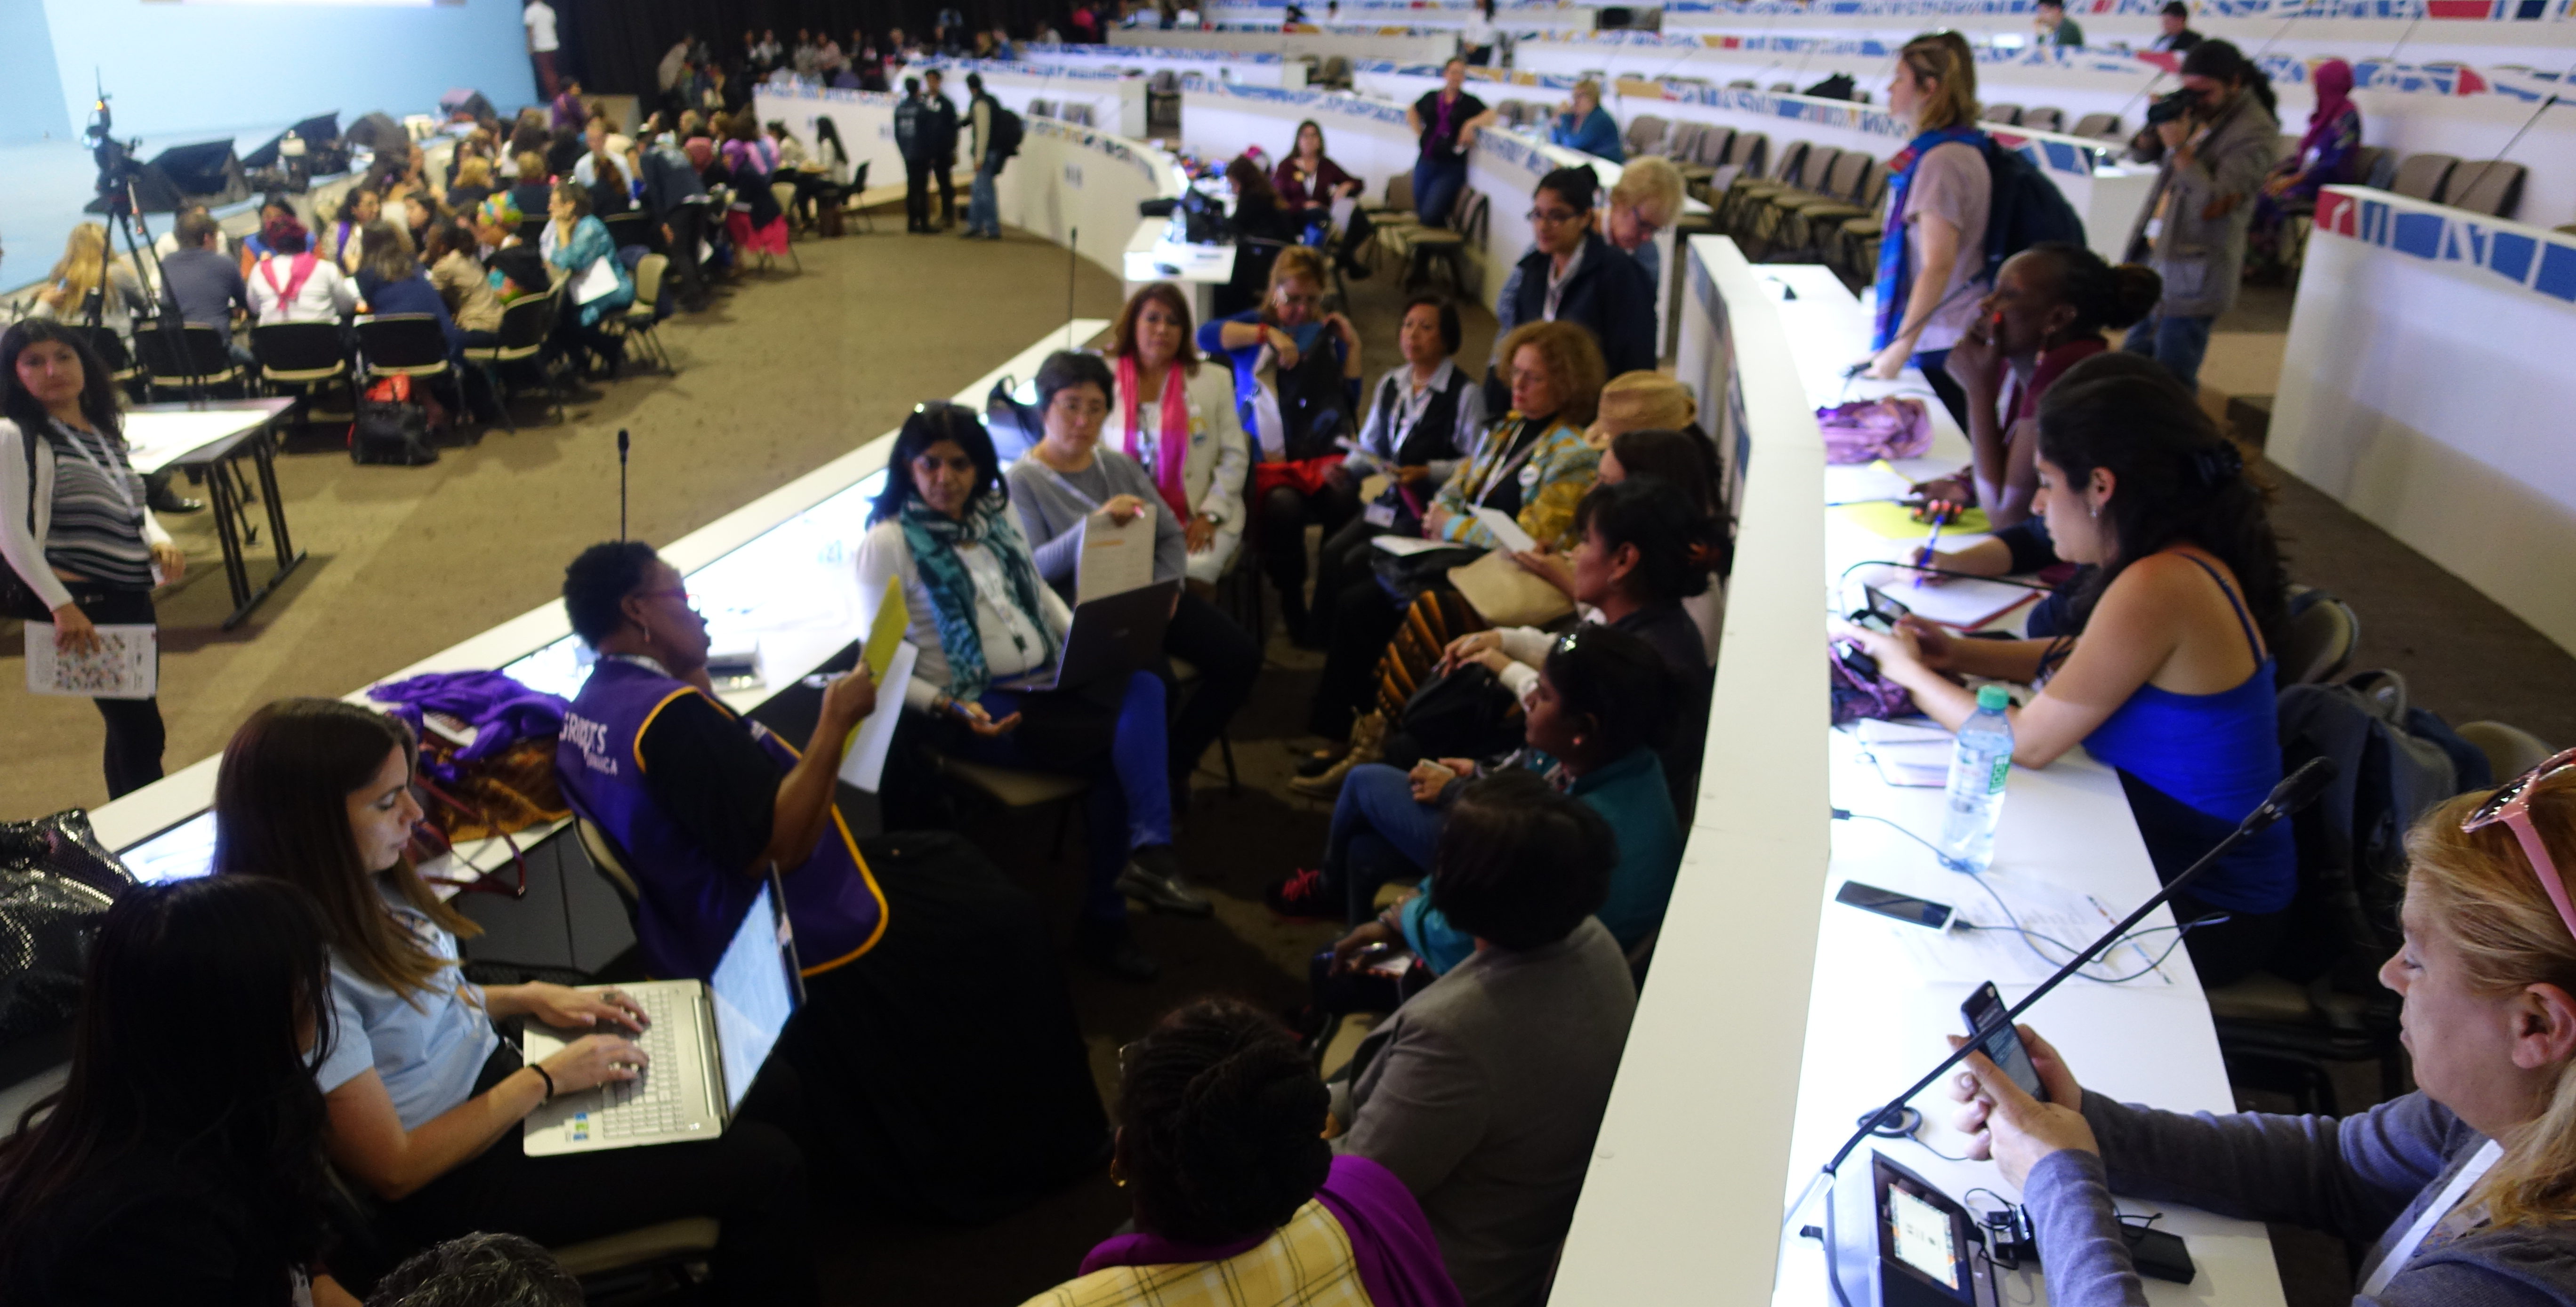 Working as a consultant for UN Women at the HABITAT III meeting in Quito.